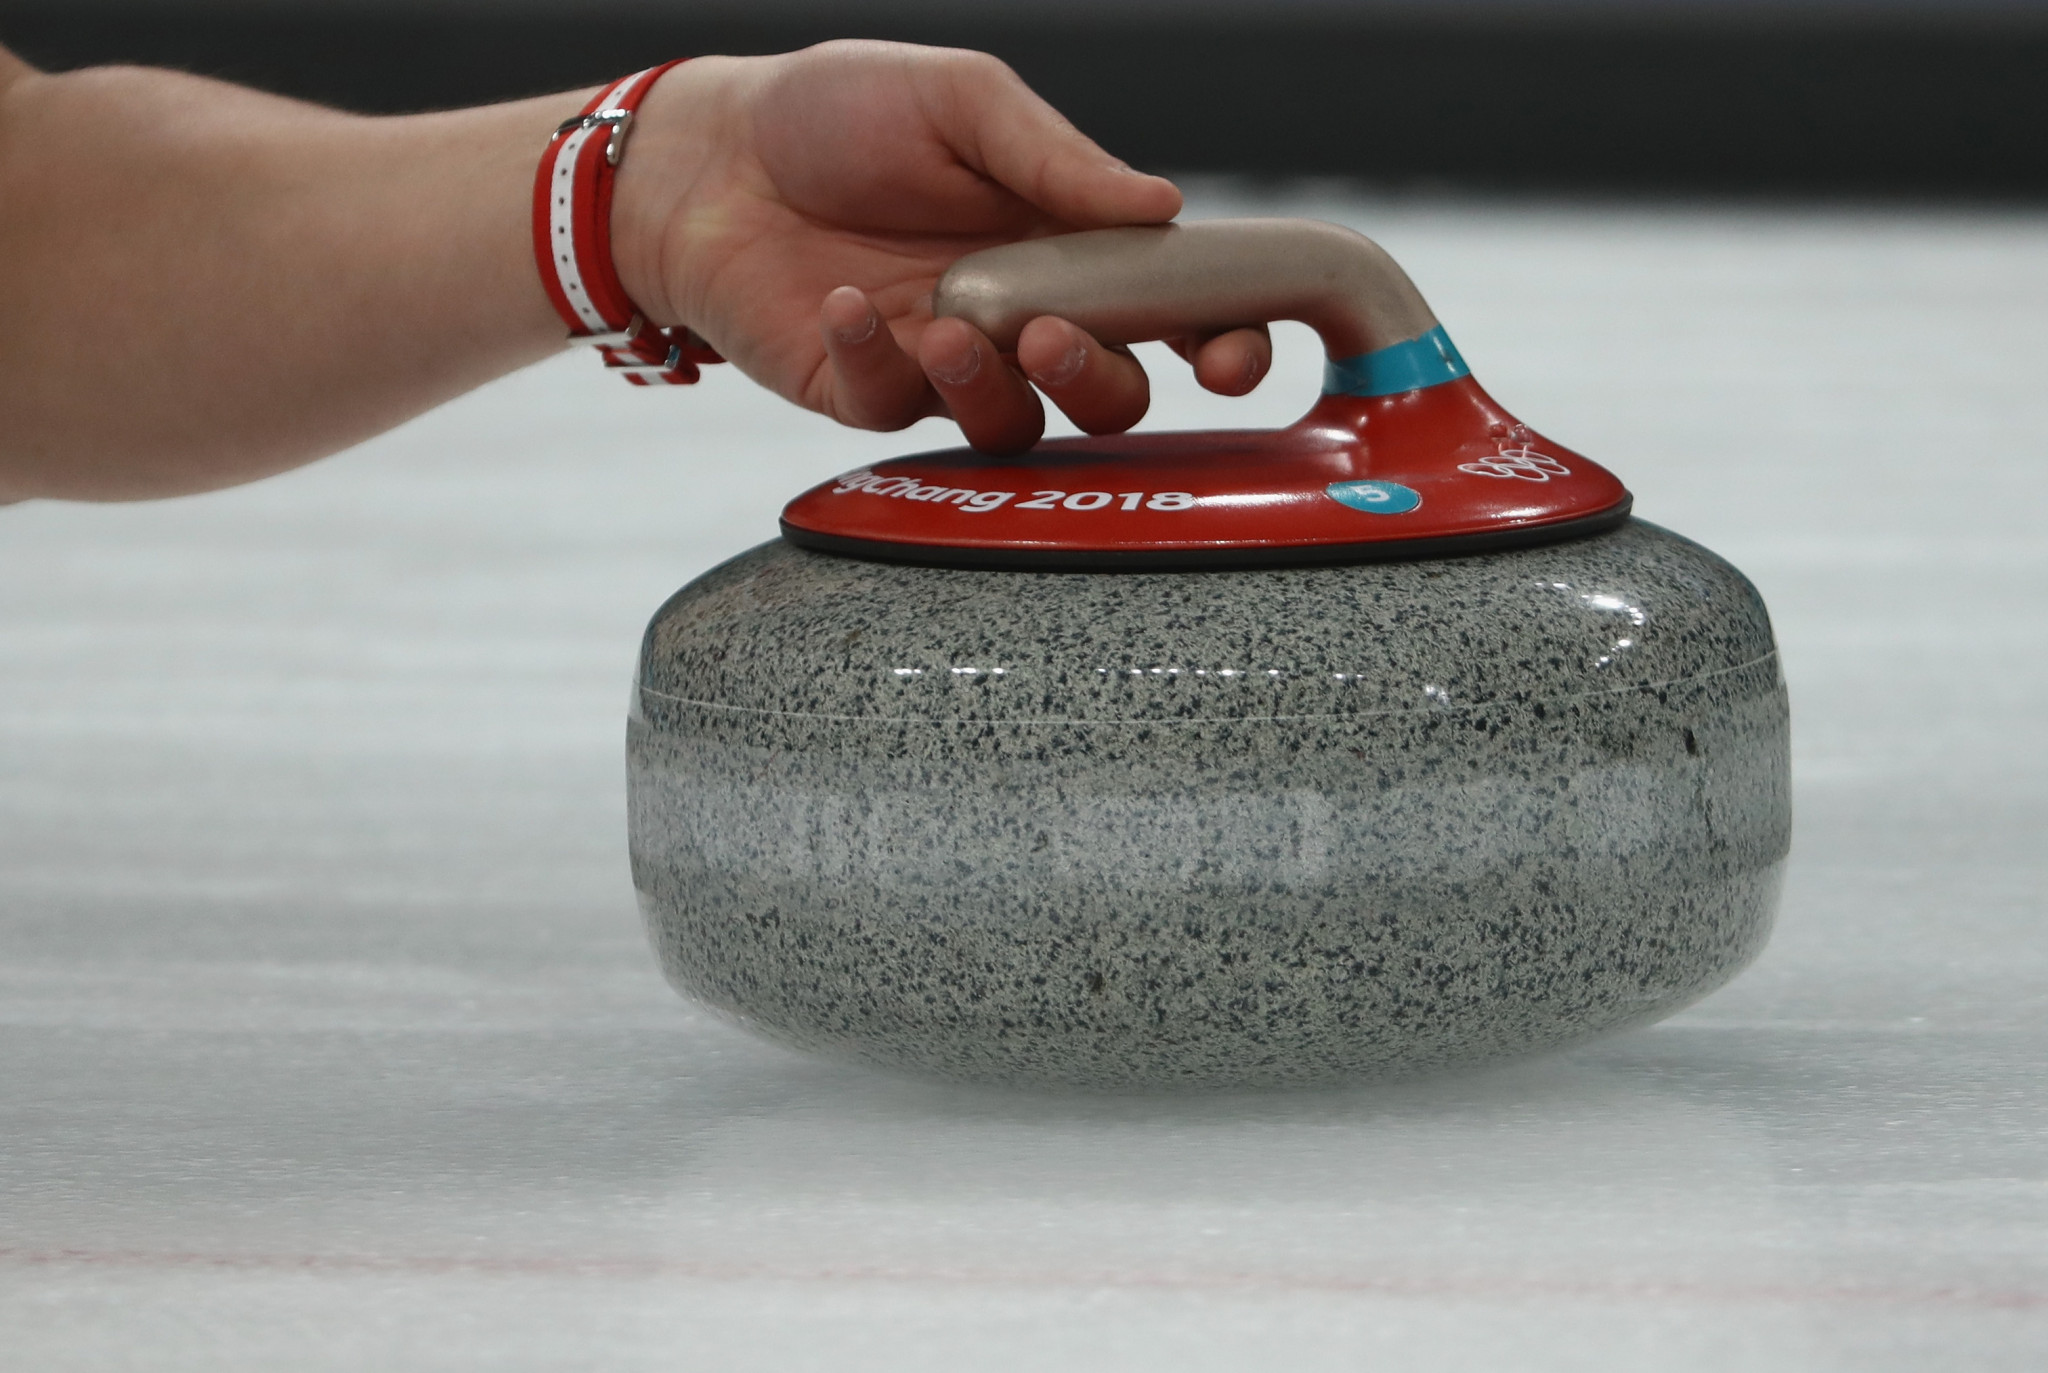 World Curling Federation and Infront extend partnership to 2022